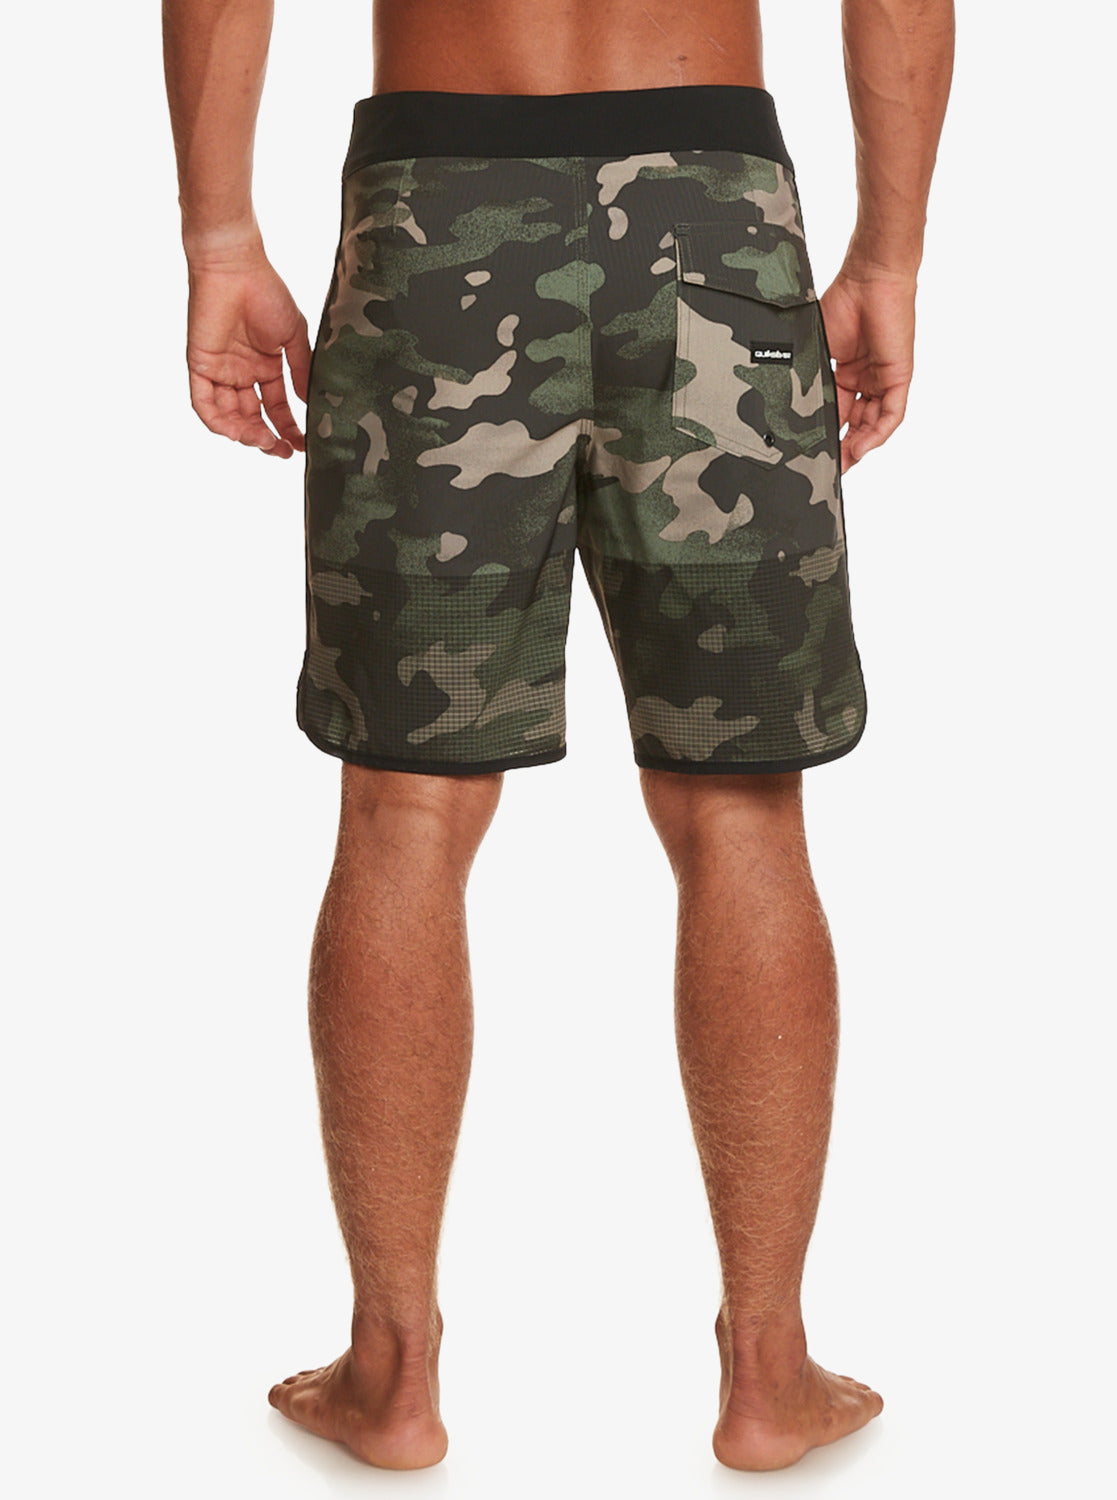 Quiksilver: Highline Scallop 19" Boardshorts